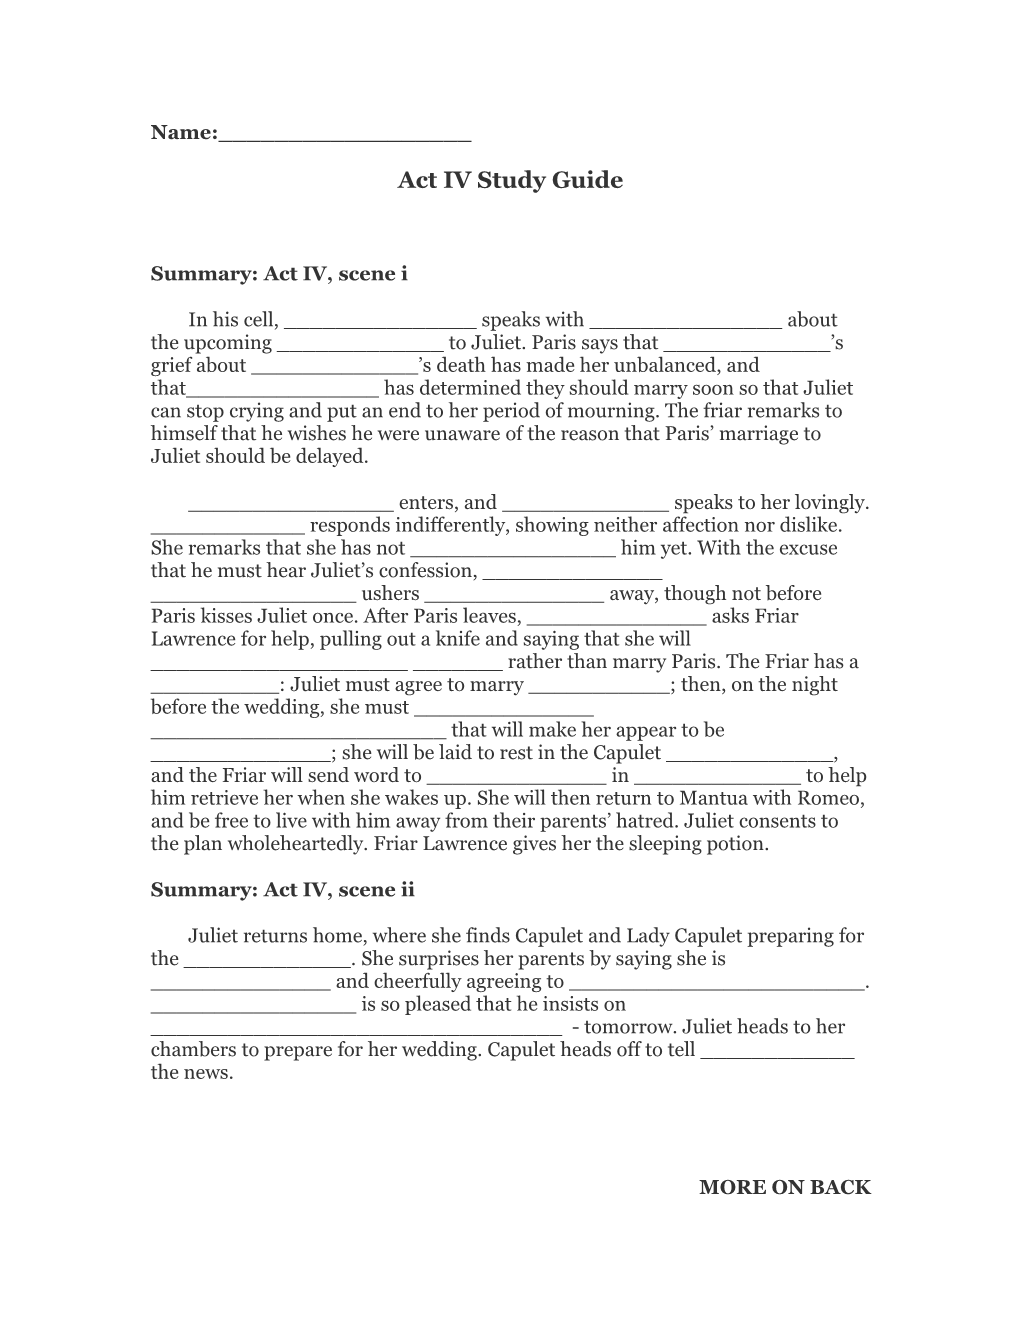 Act IV Study Guide s1